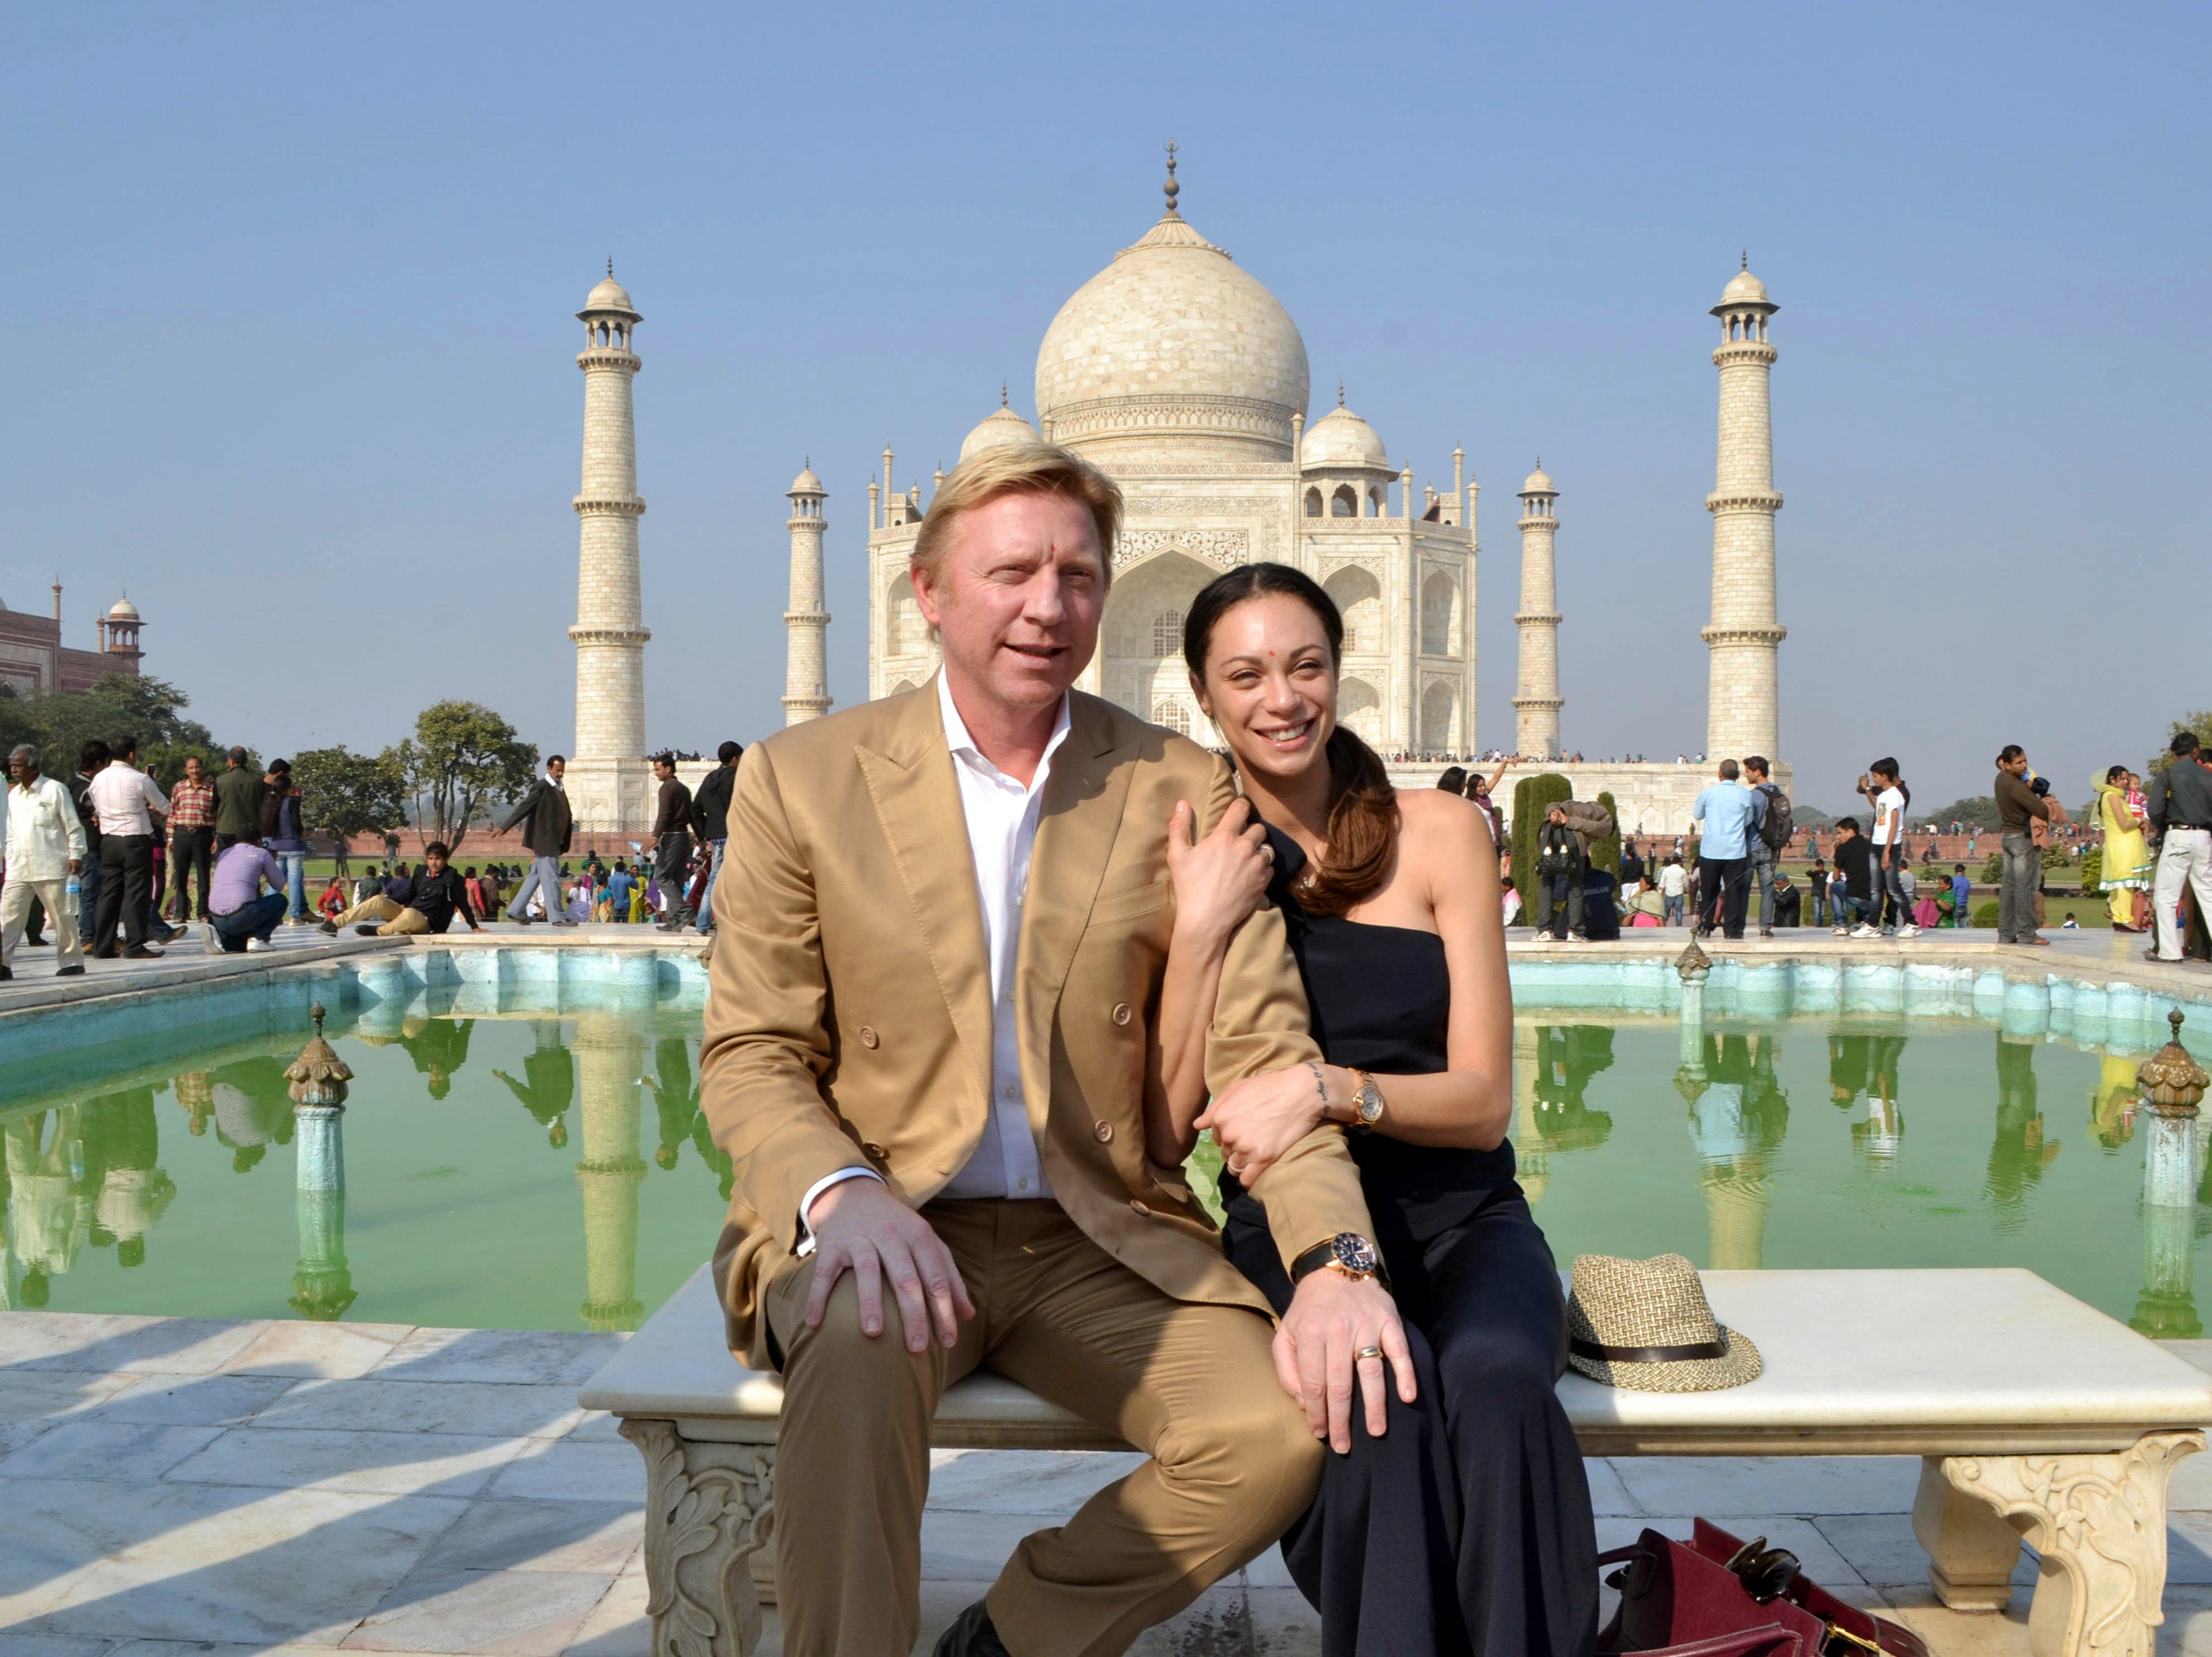 Former tennis star Boris Becker and his wife Lilly pose for a photograph in front of the Taj Mahal in 2012